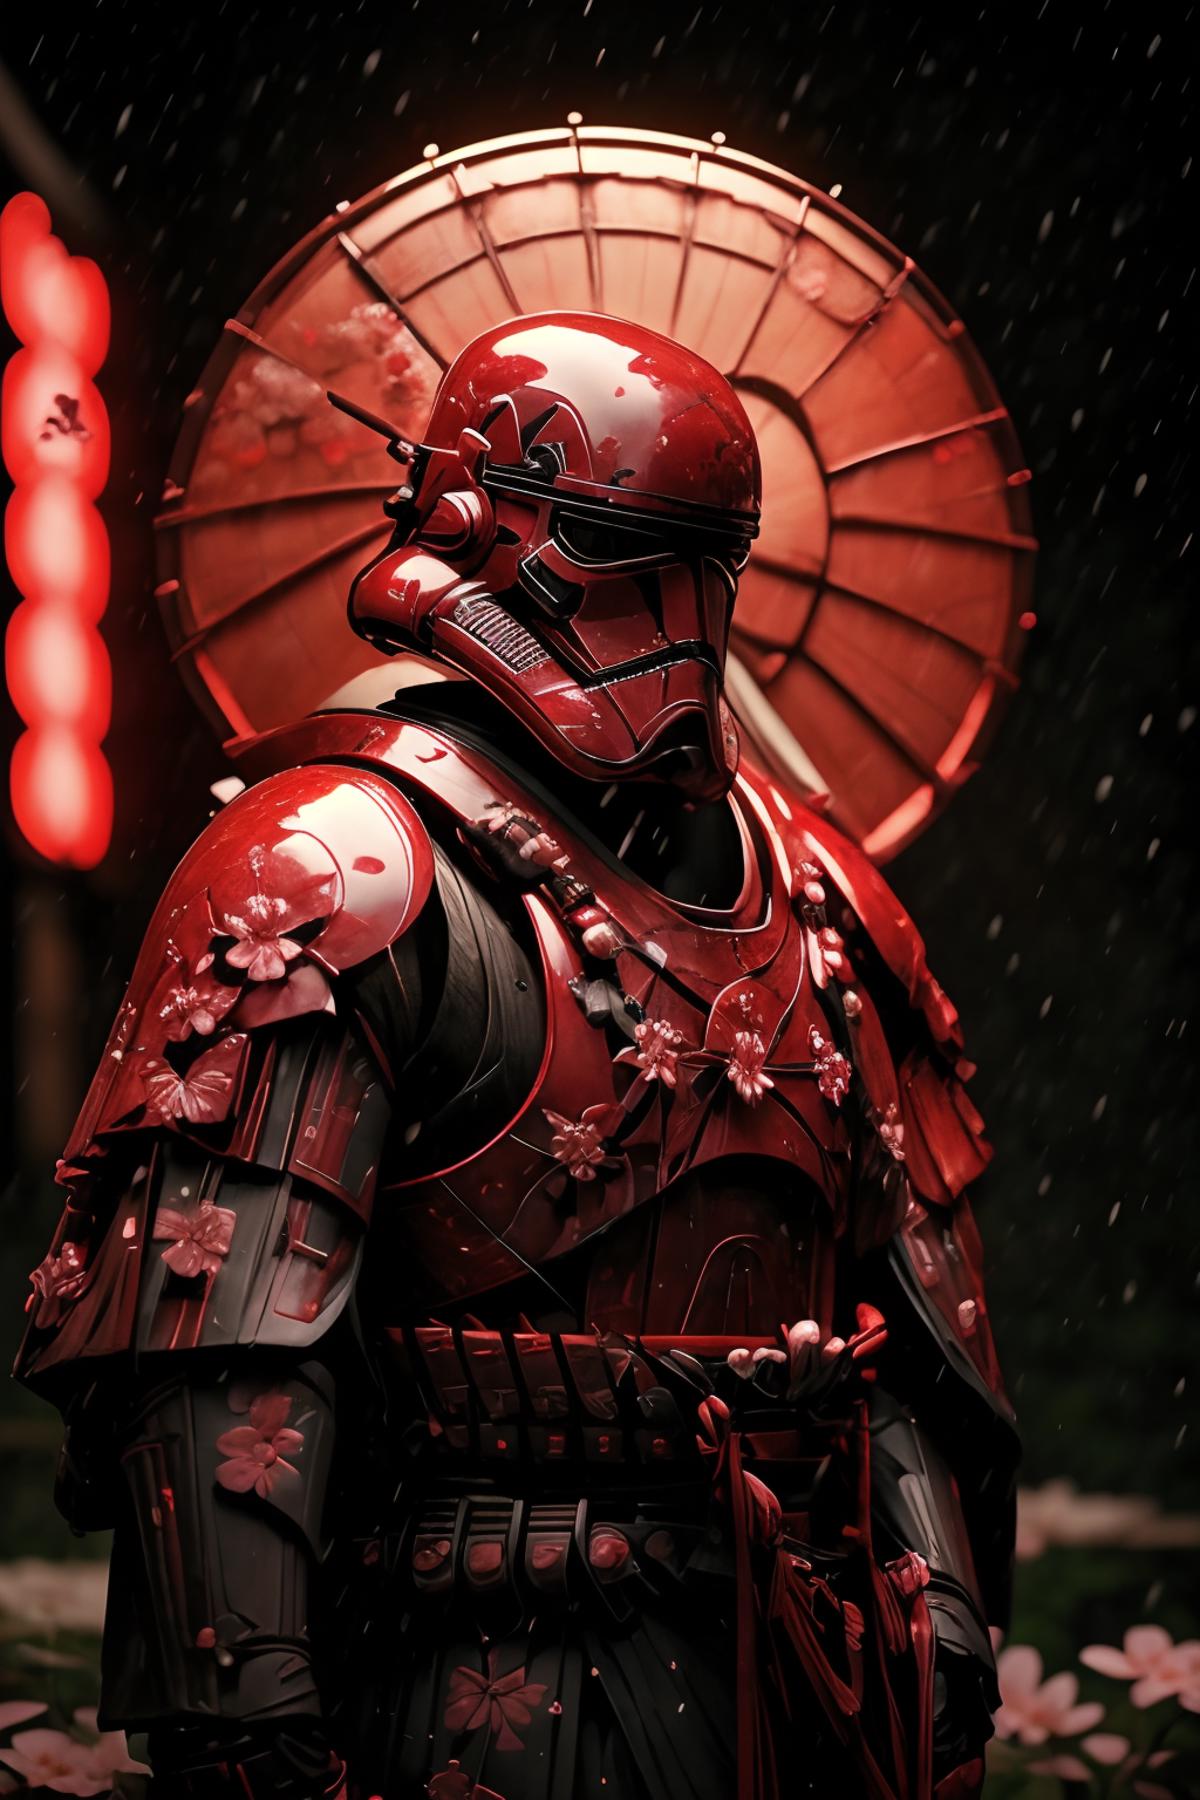 A red stormtrooper in a red and black armor with a red umbrella in the background.